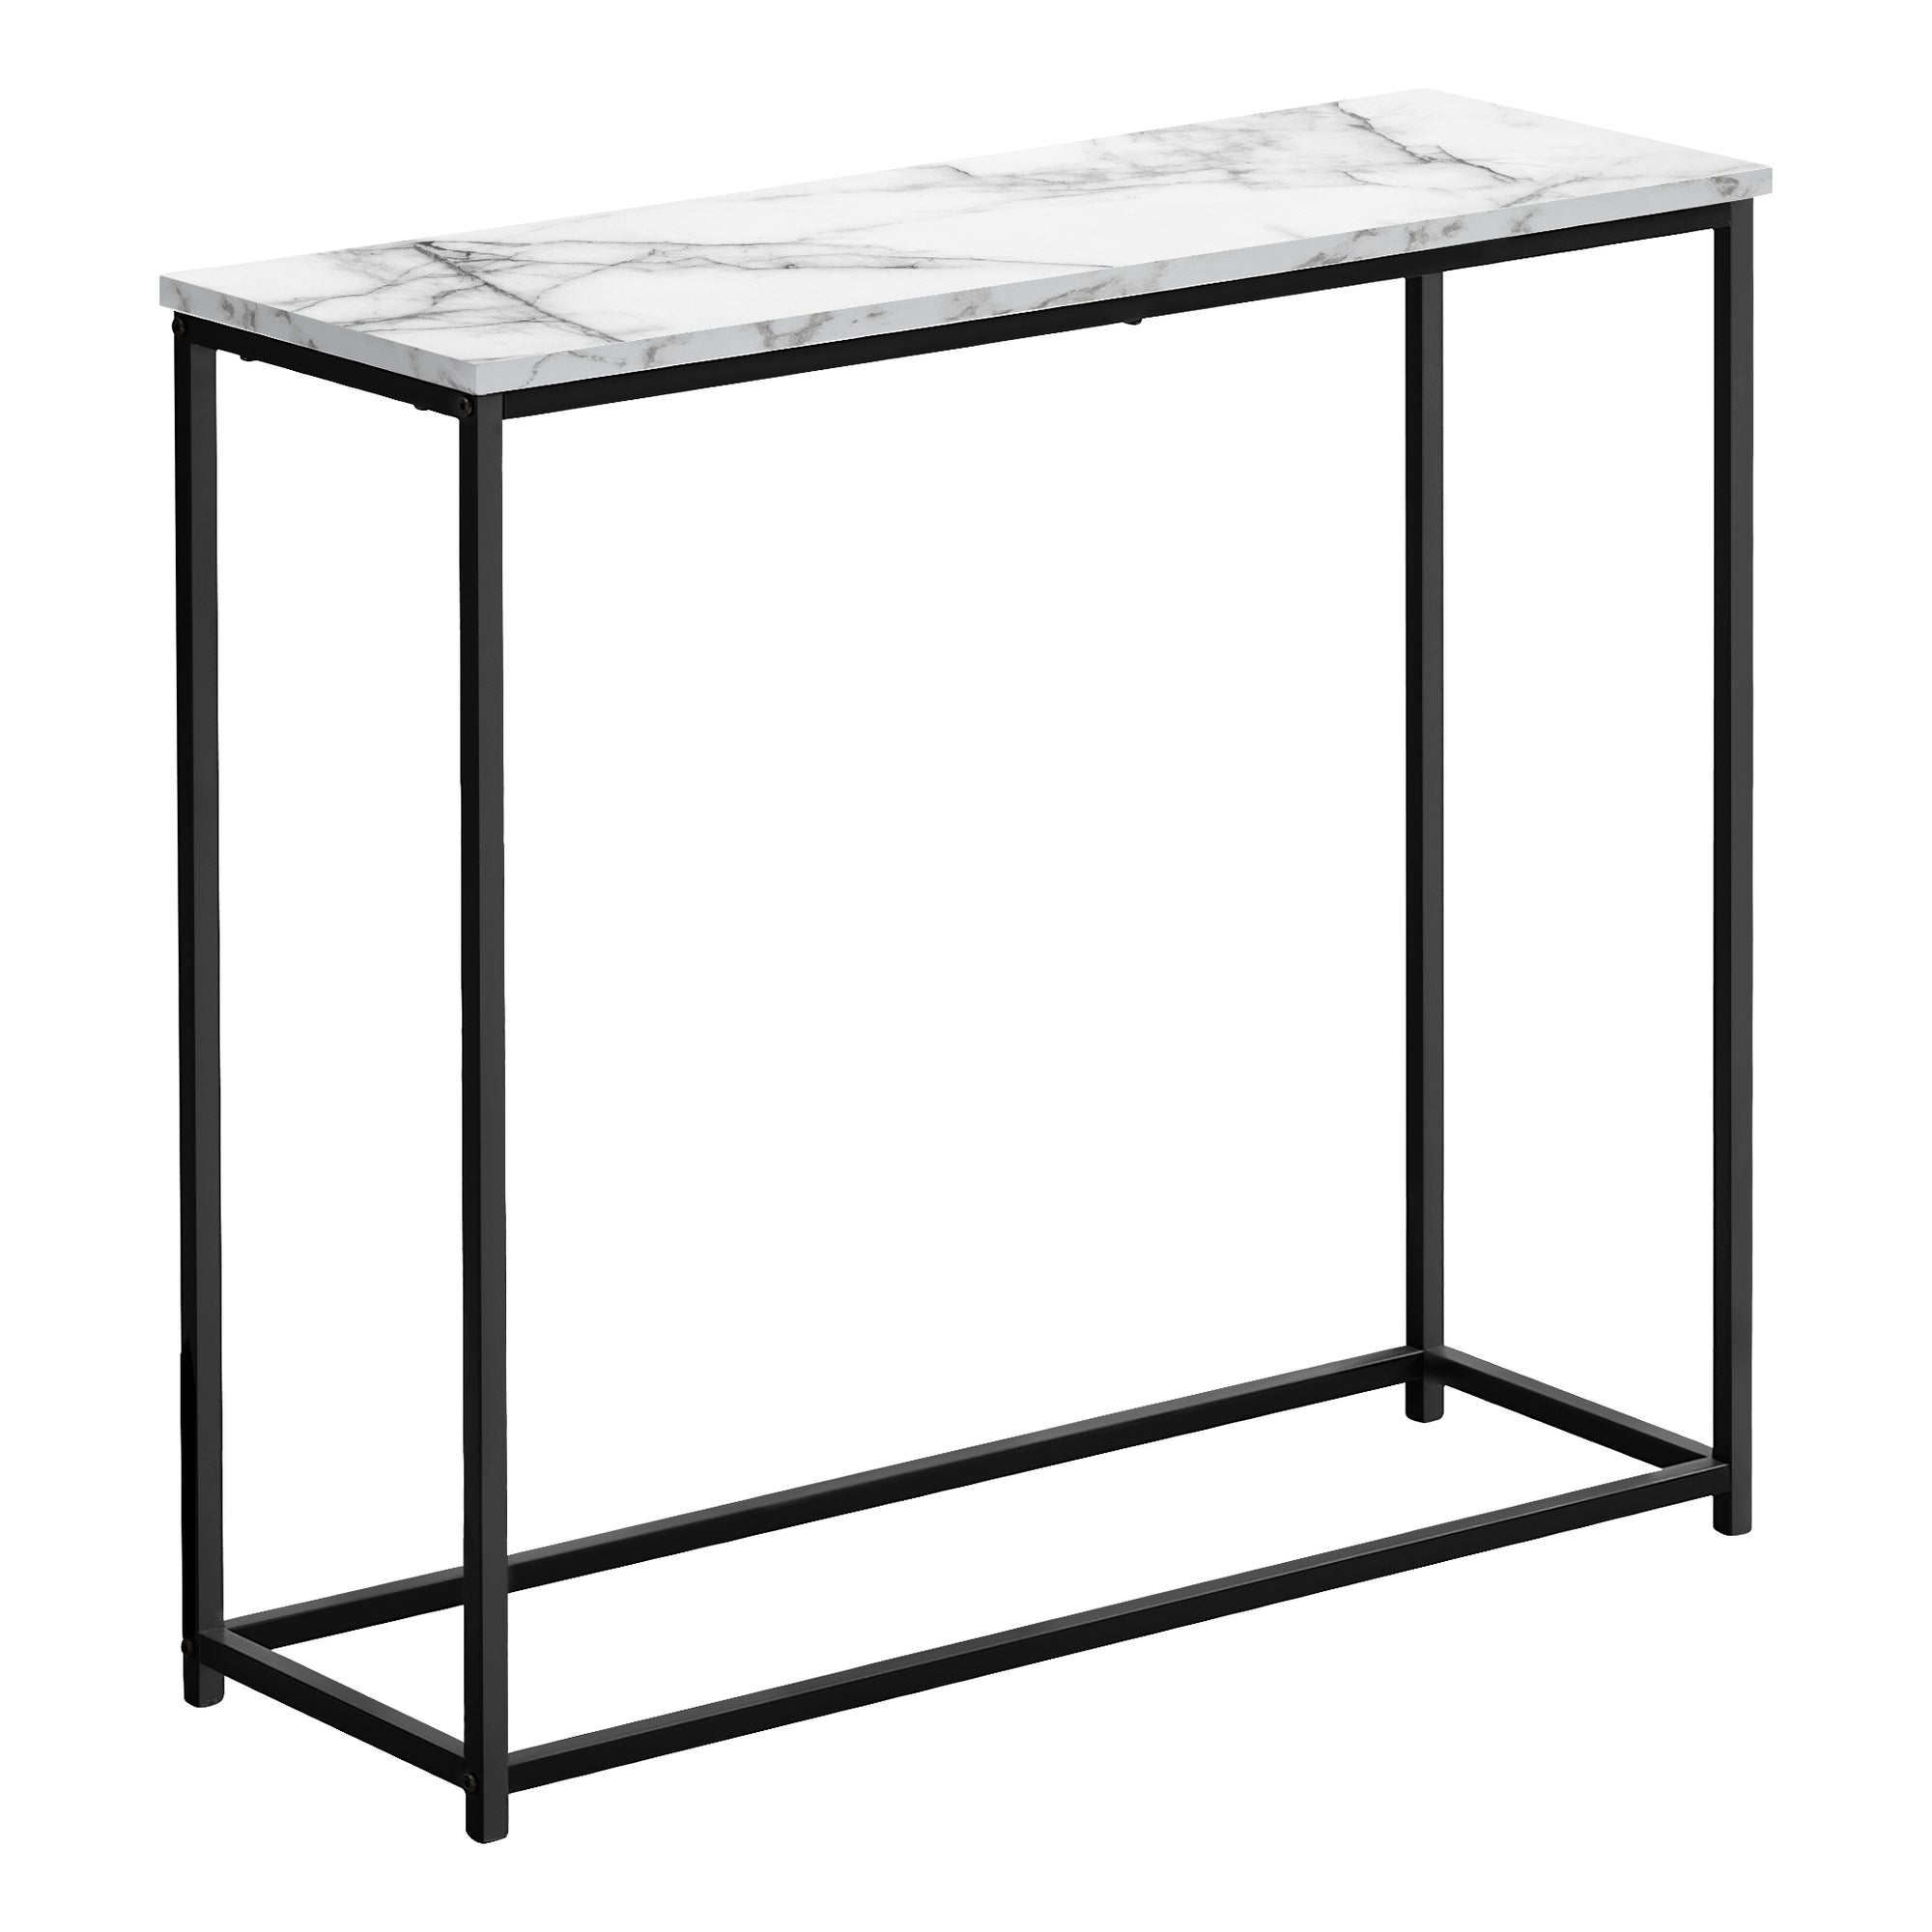 ACCENT TABLE - 32"L / BLACK / BLACK METAL HALL CONSOLE